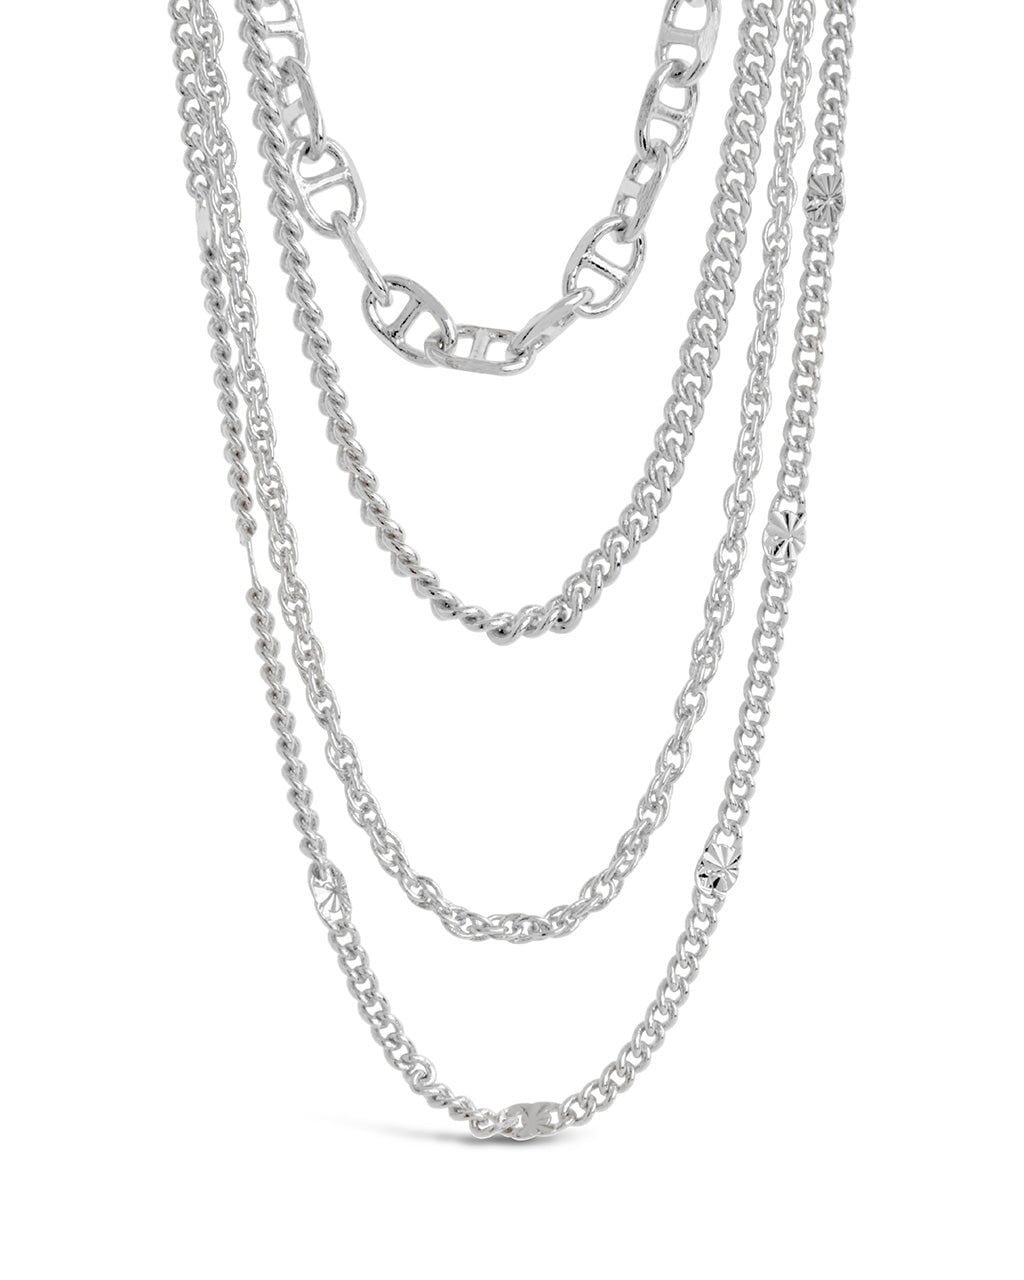 Lulu Layered Necklace Necklace Sterling Forever Silver 